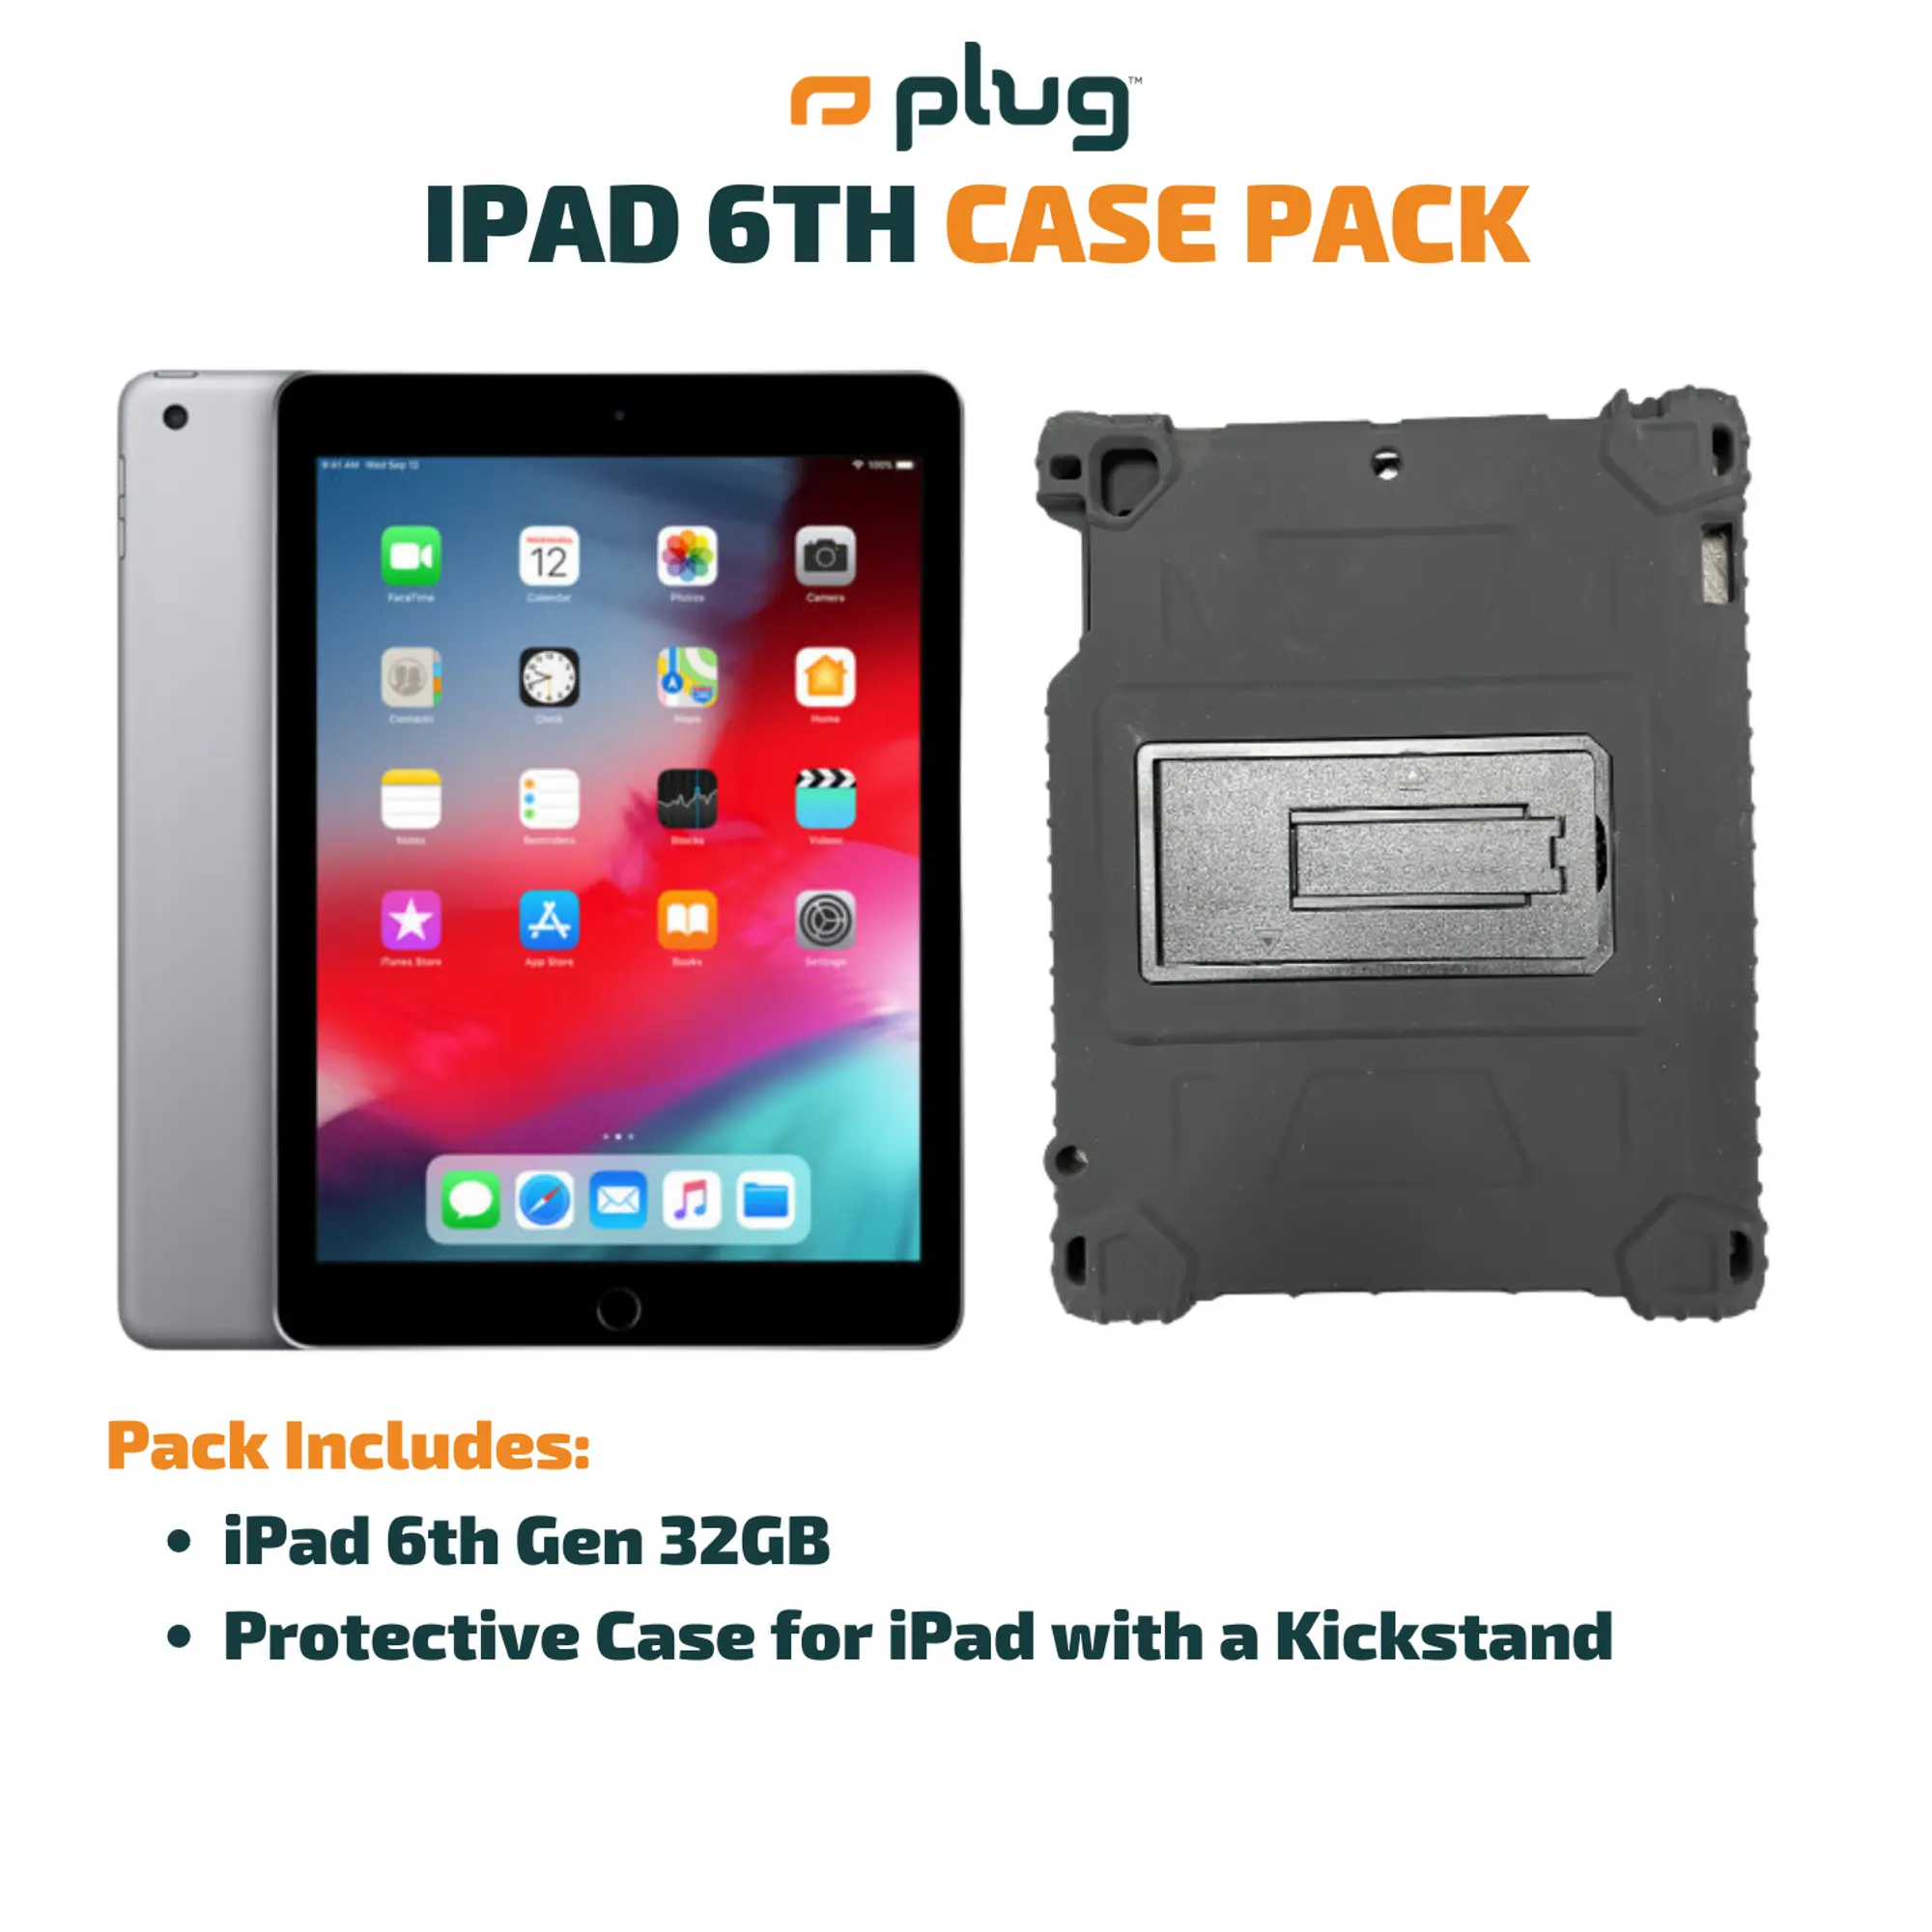 Paranafloden Forberedelse Boost iPad 6th + Case Pack